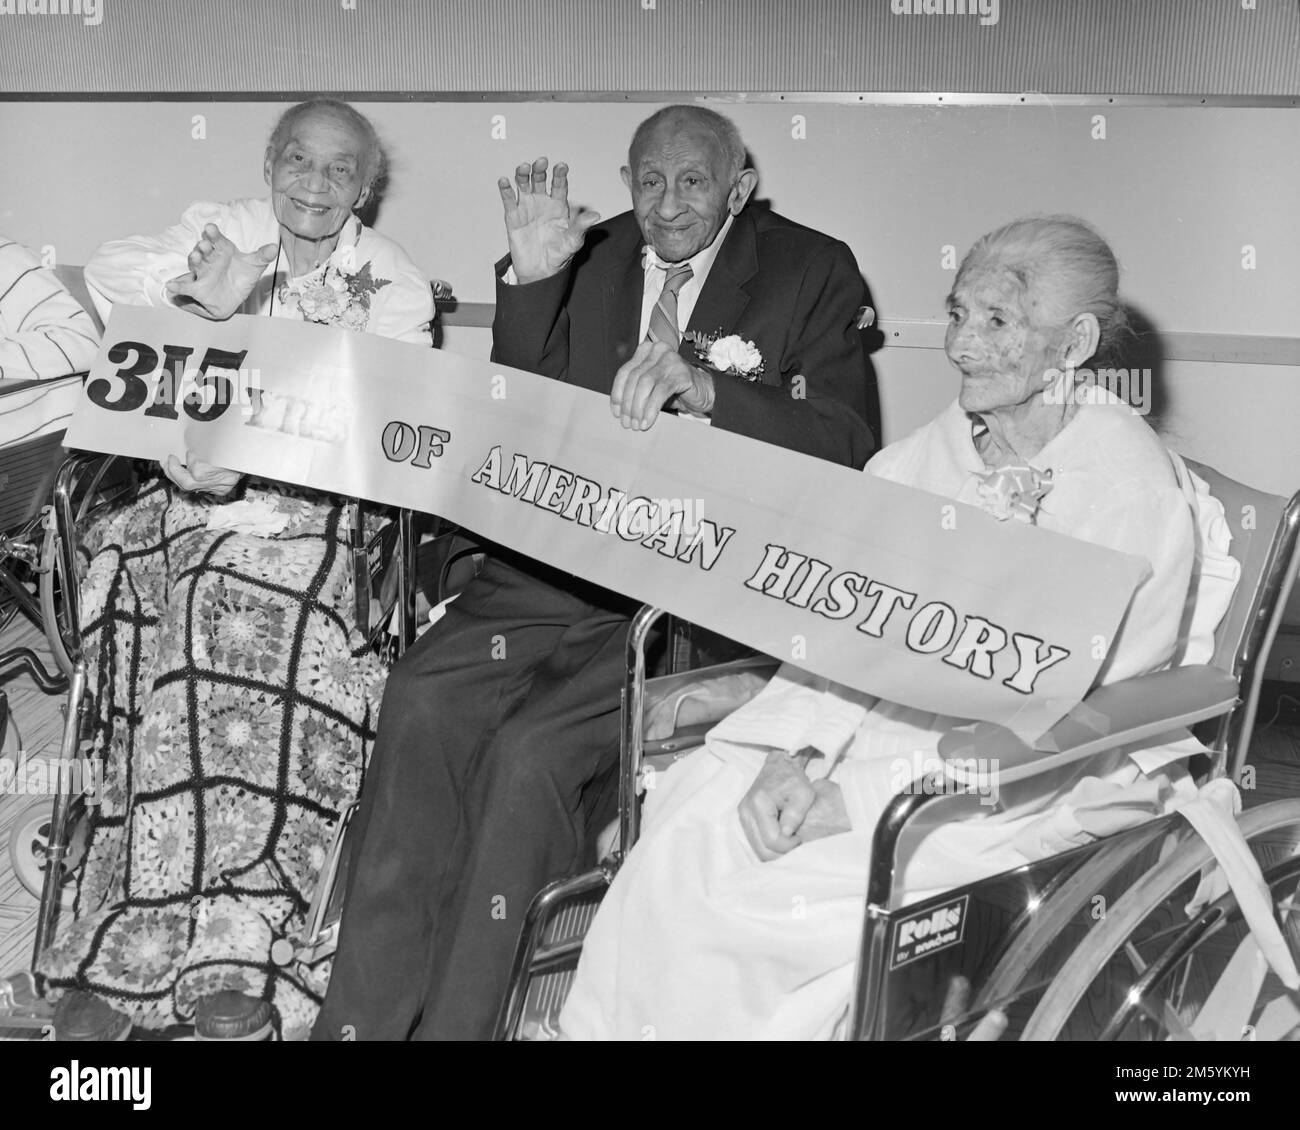 Senior citizens with a combined total of 315 years on earth pose in a California nursing home, ca. 1963. Stock Photo